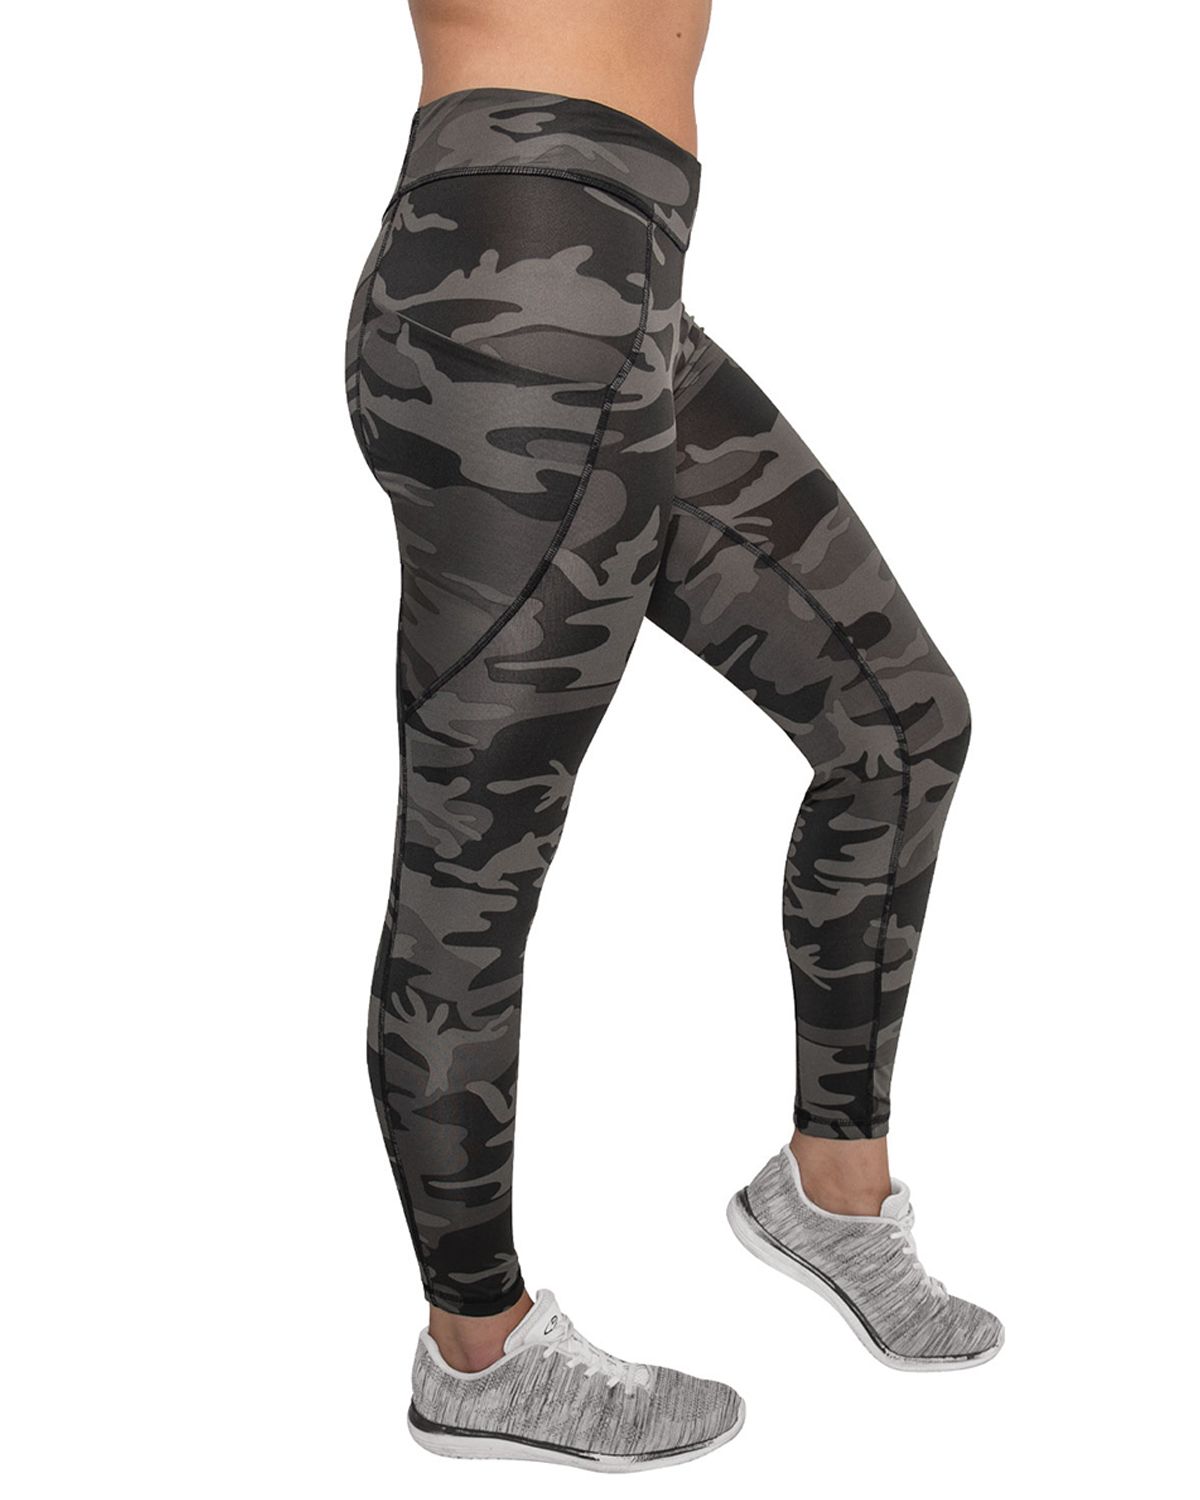 performance leggings with pockets